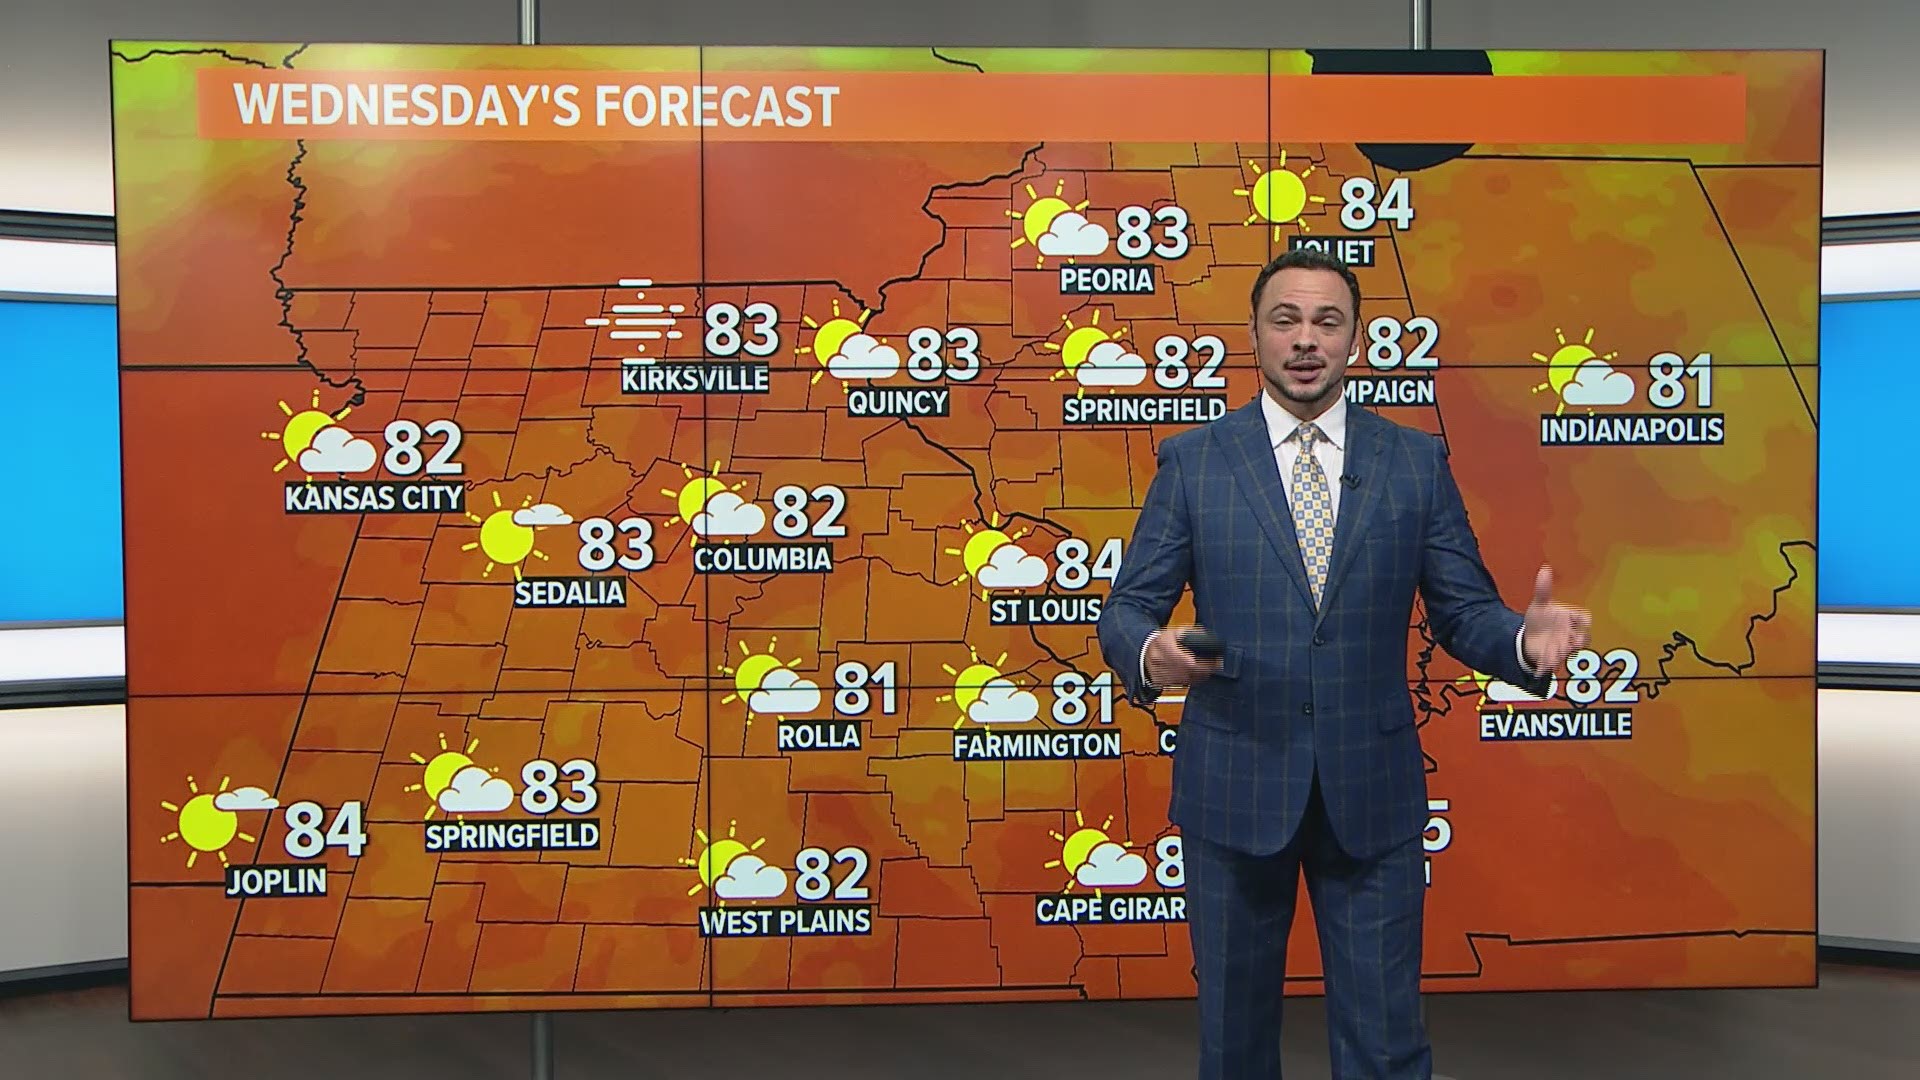 Wednesday morning weather forecast in St. louis 730am | www.waldenwongart.com